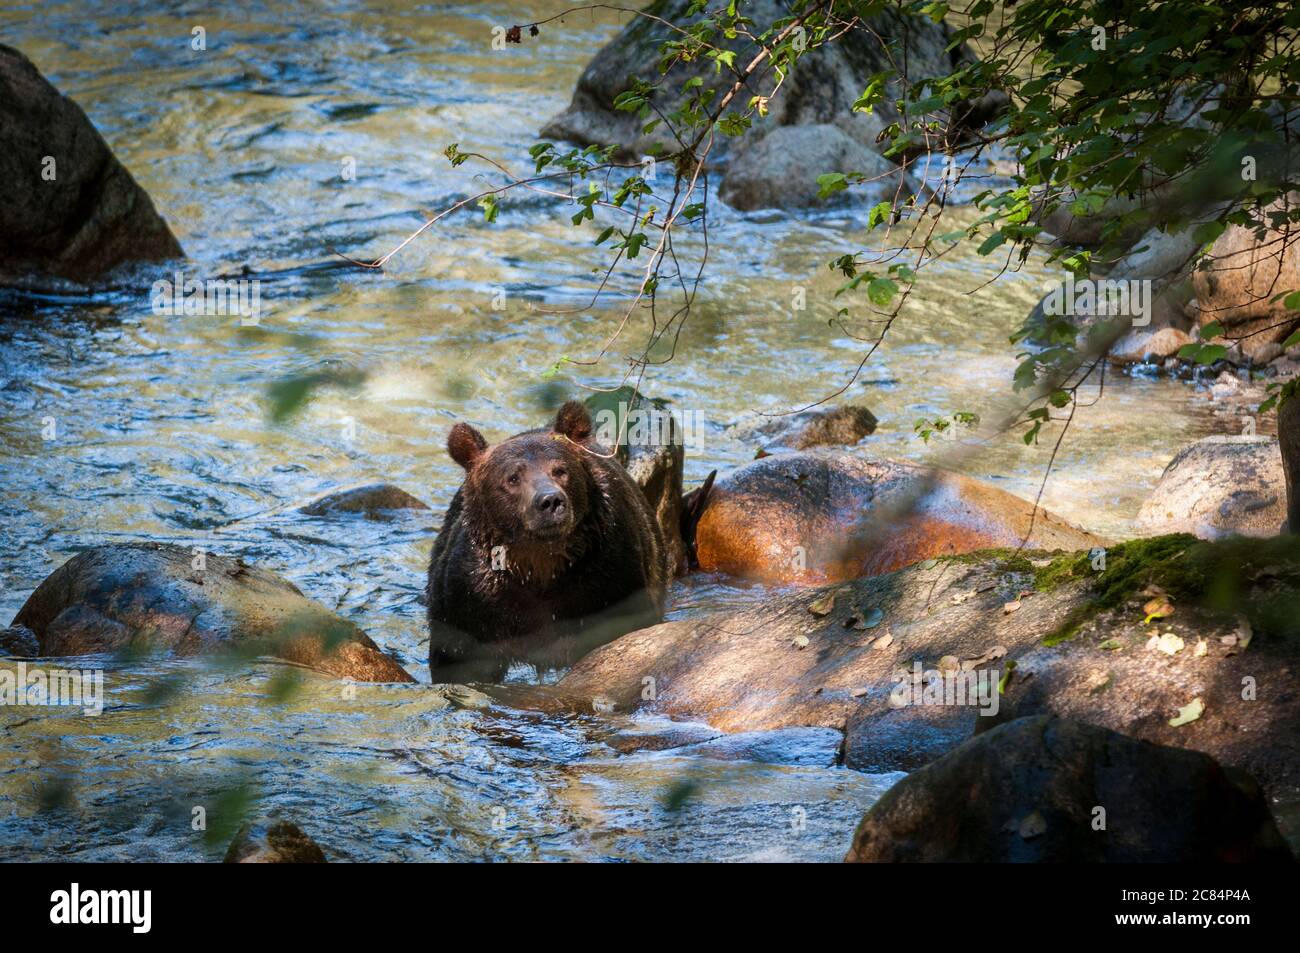 Male grizzly bear, near the Orford River, British Columbia, Canada. Stock Photo